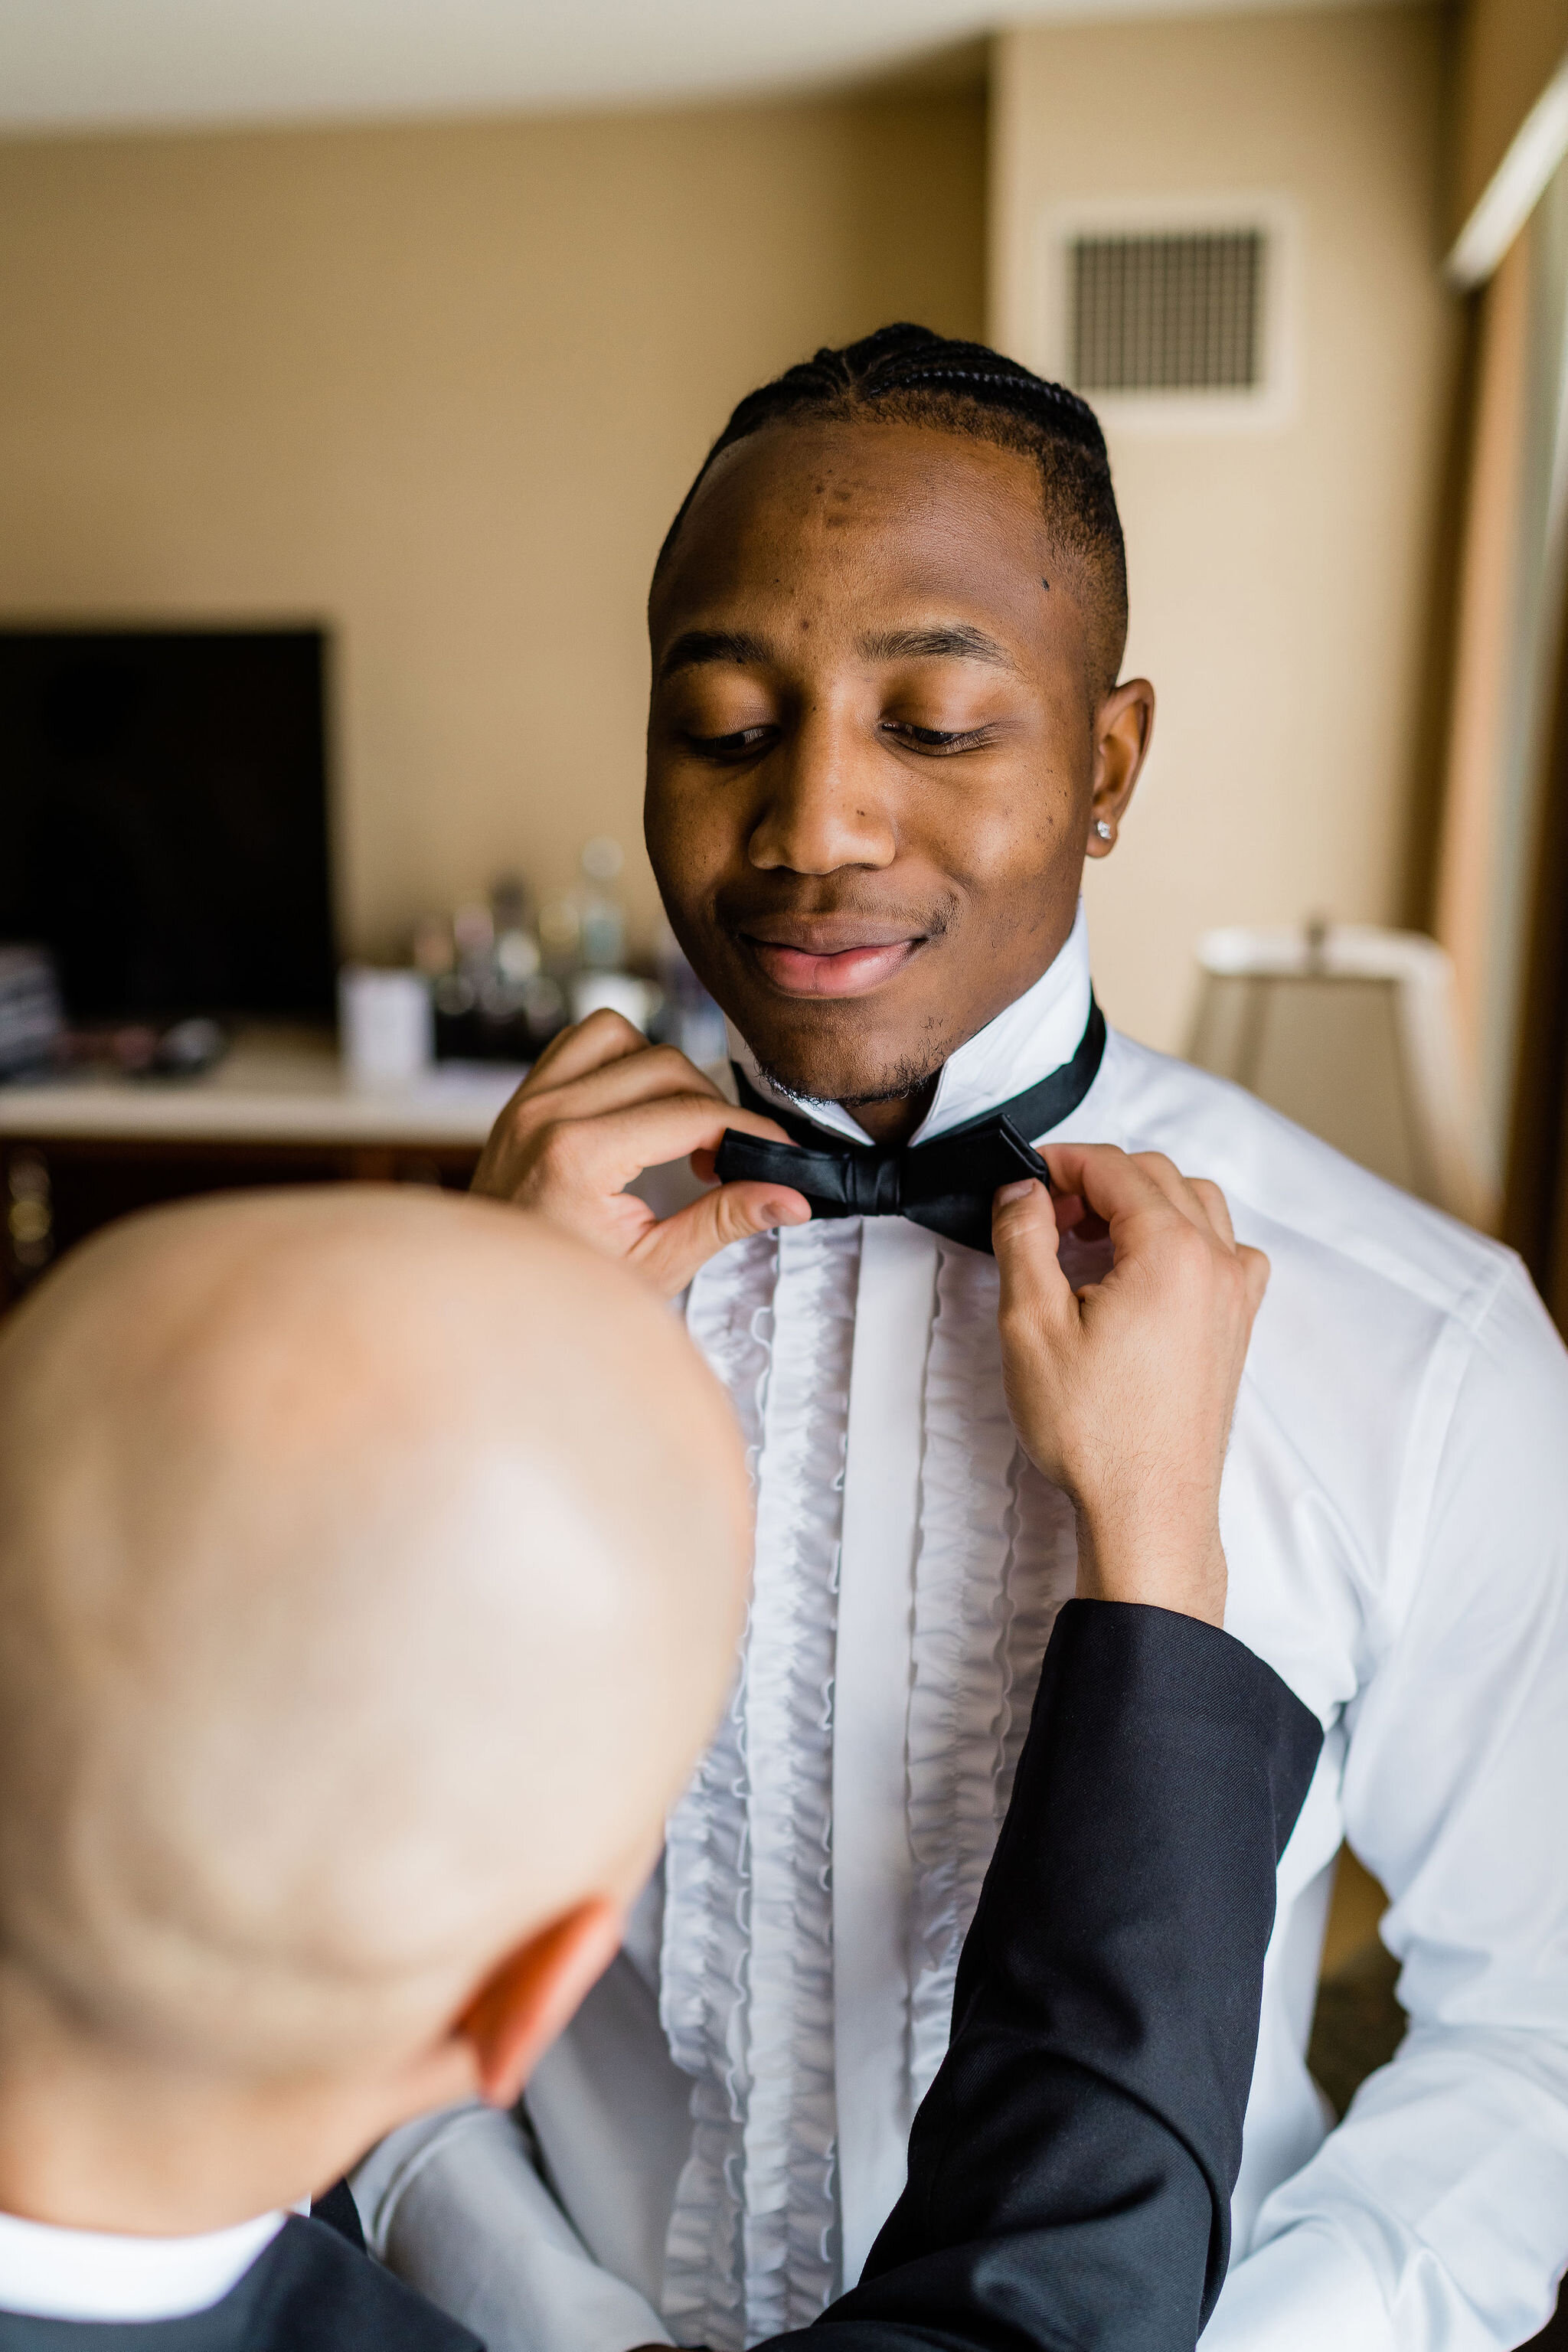 Groom getting his bowtie put on